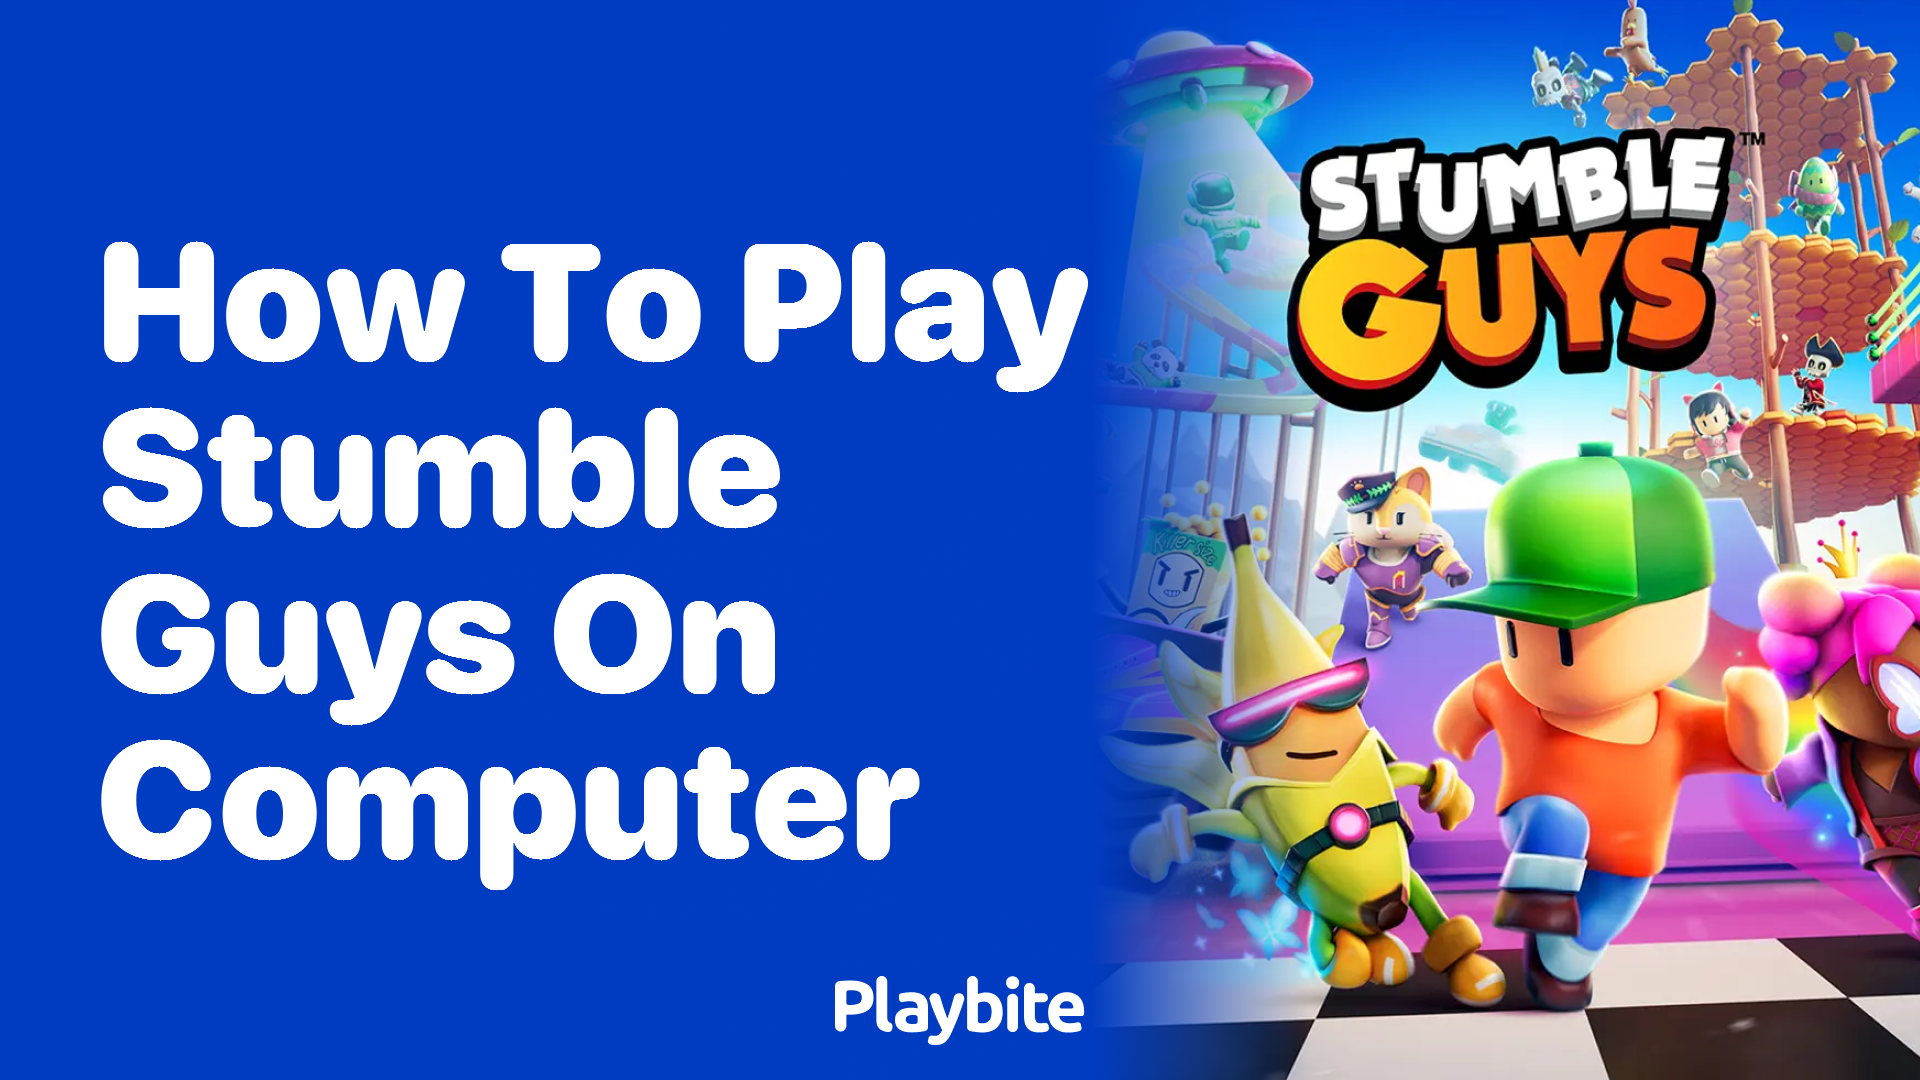 How to Play Stumble Guys on Your Computer: A Fun Guide